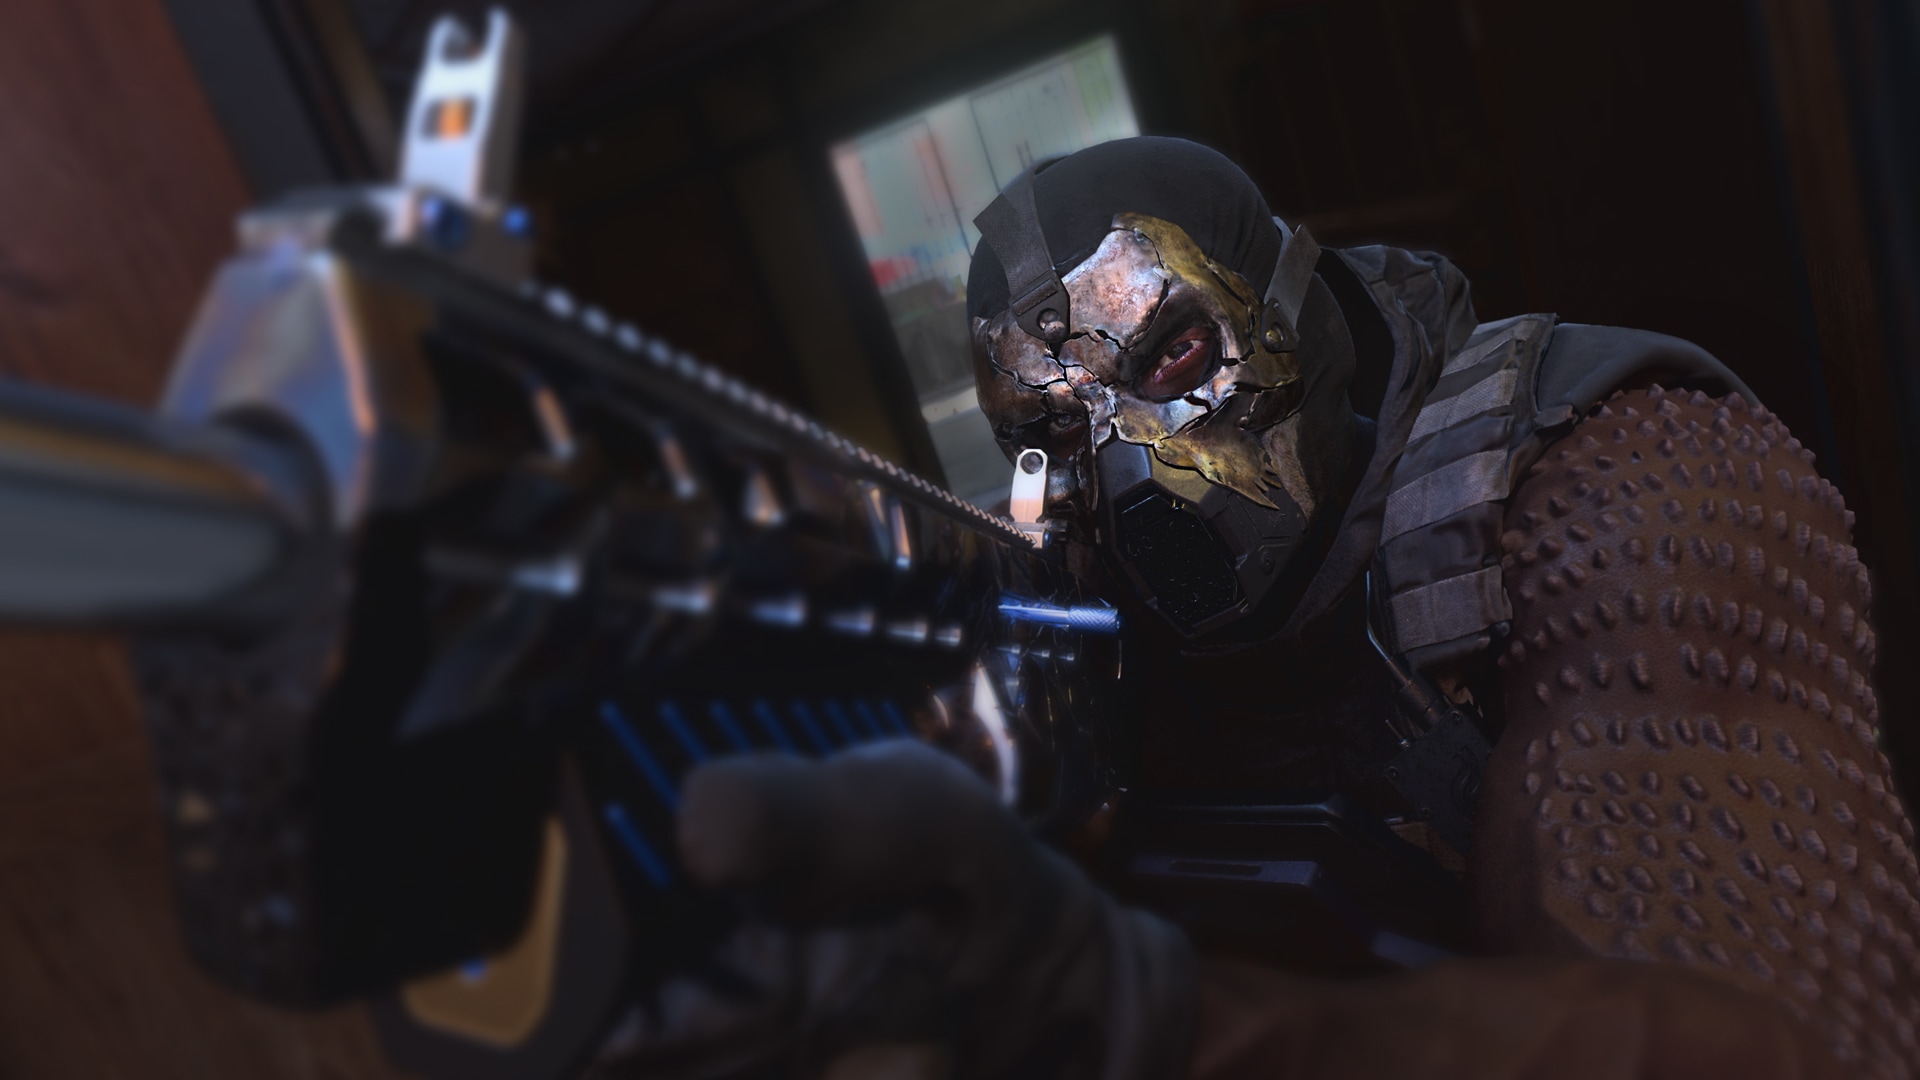 Introducing BlackCell, an Unparalleled Reinforcement in Call of